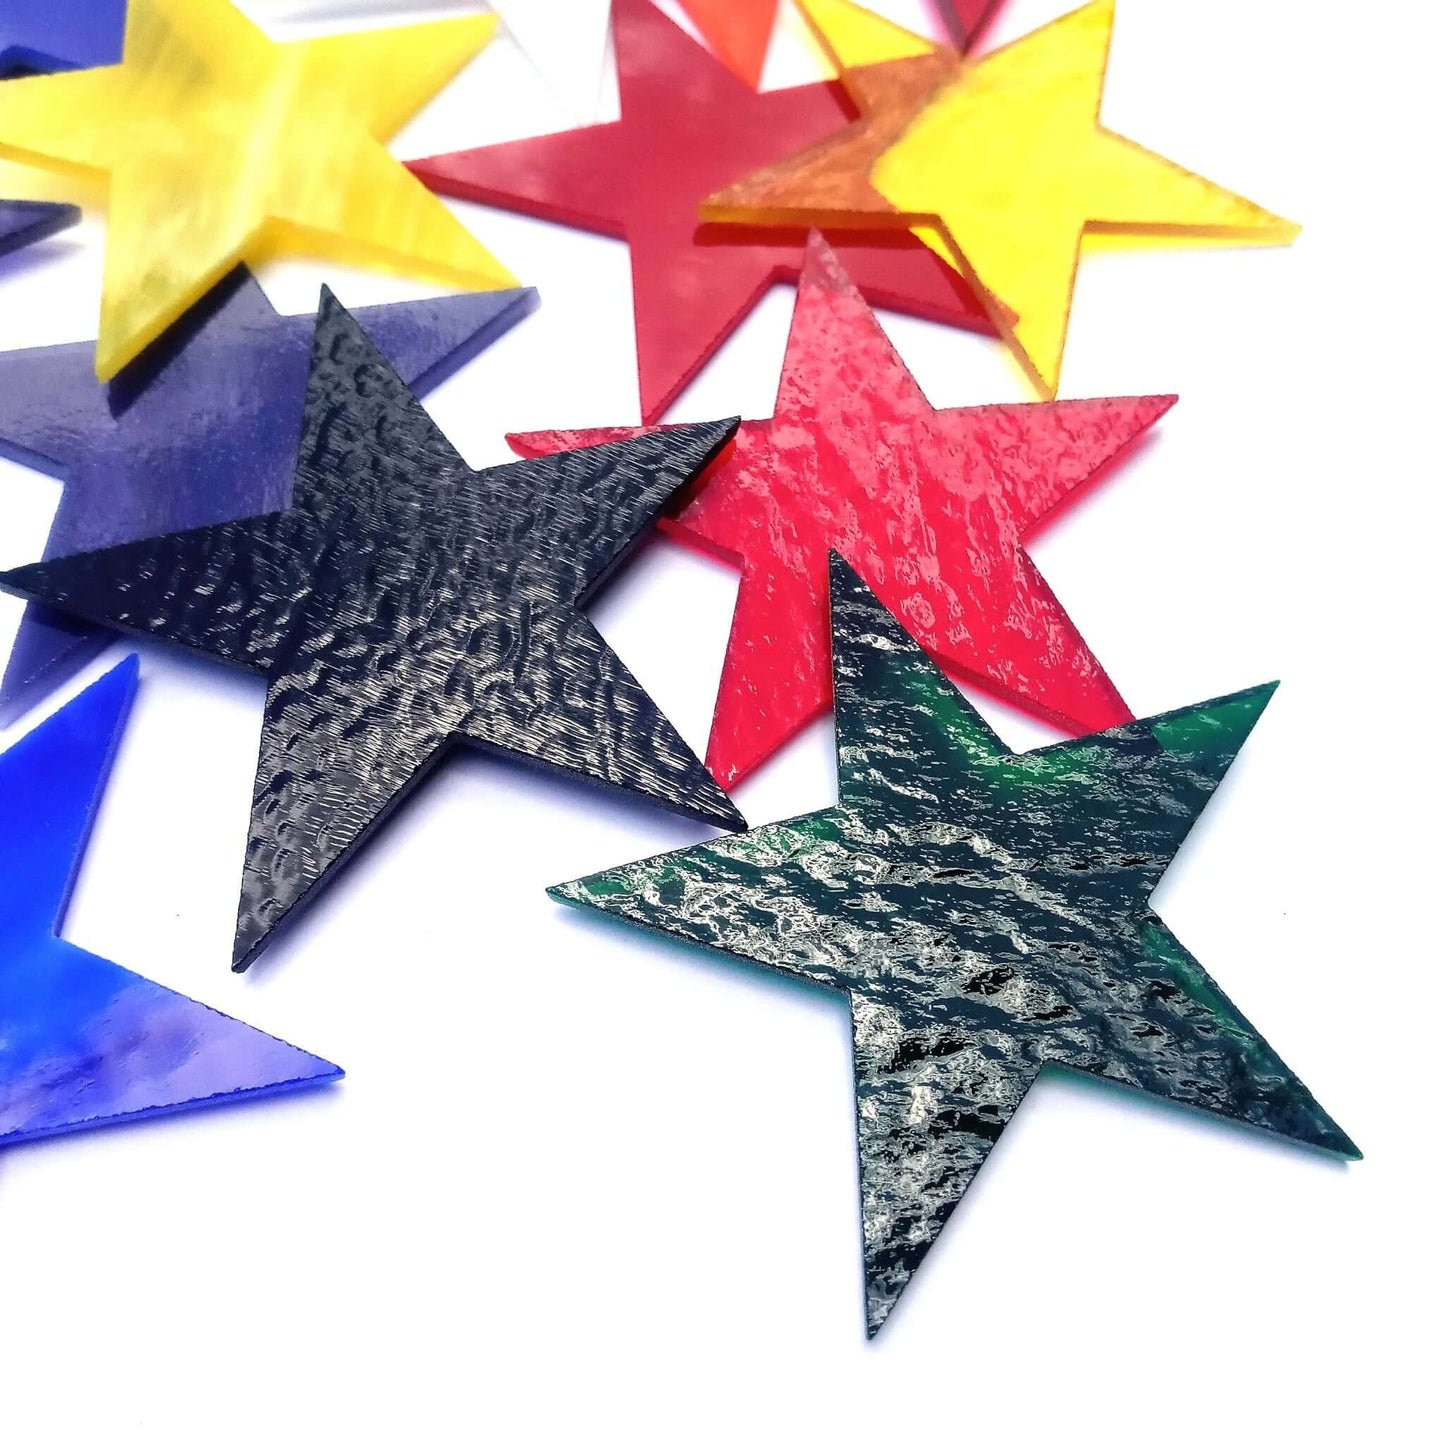 Precut Stained Glass Stars, Assorted Colors, 3" Glass Stars for Mosaics, Jewelry, Stained Glass Art